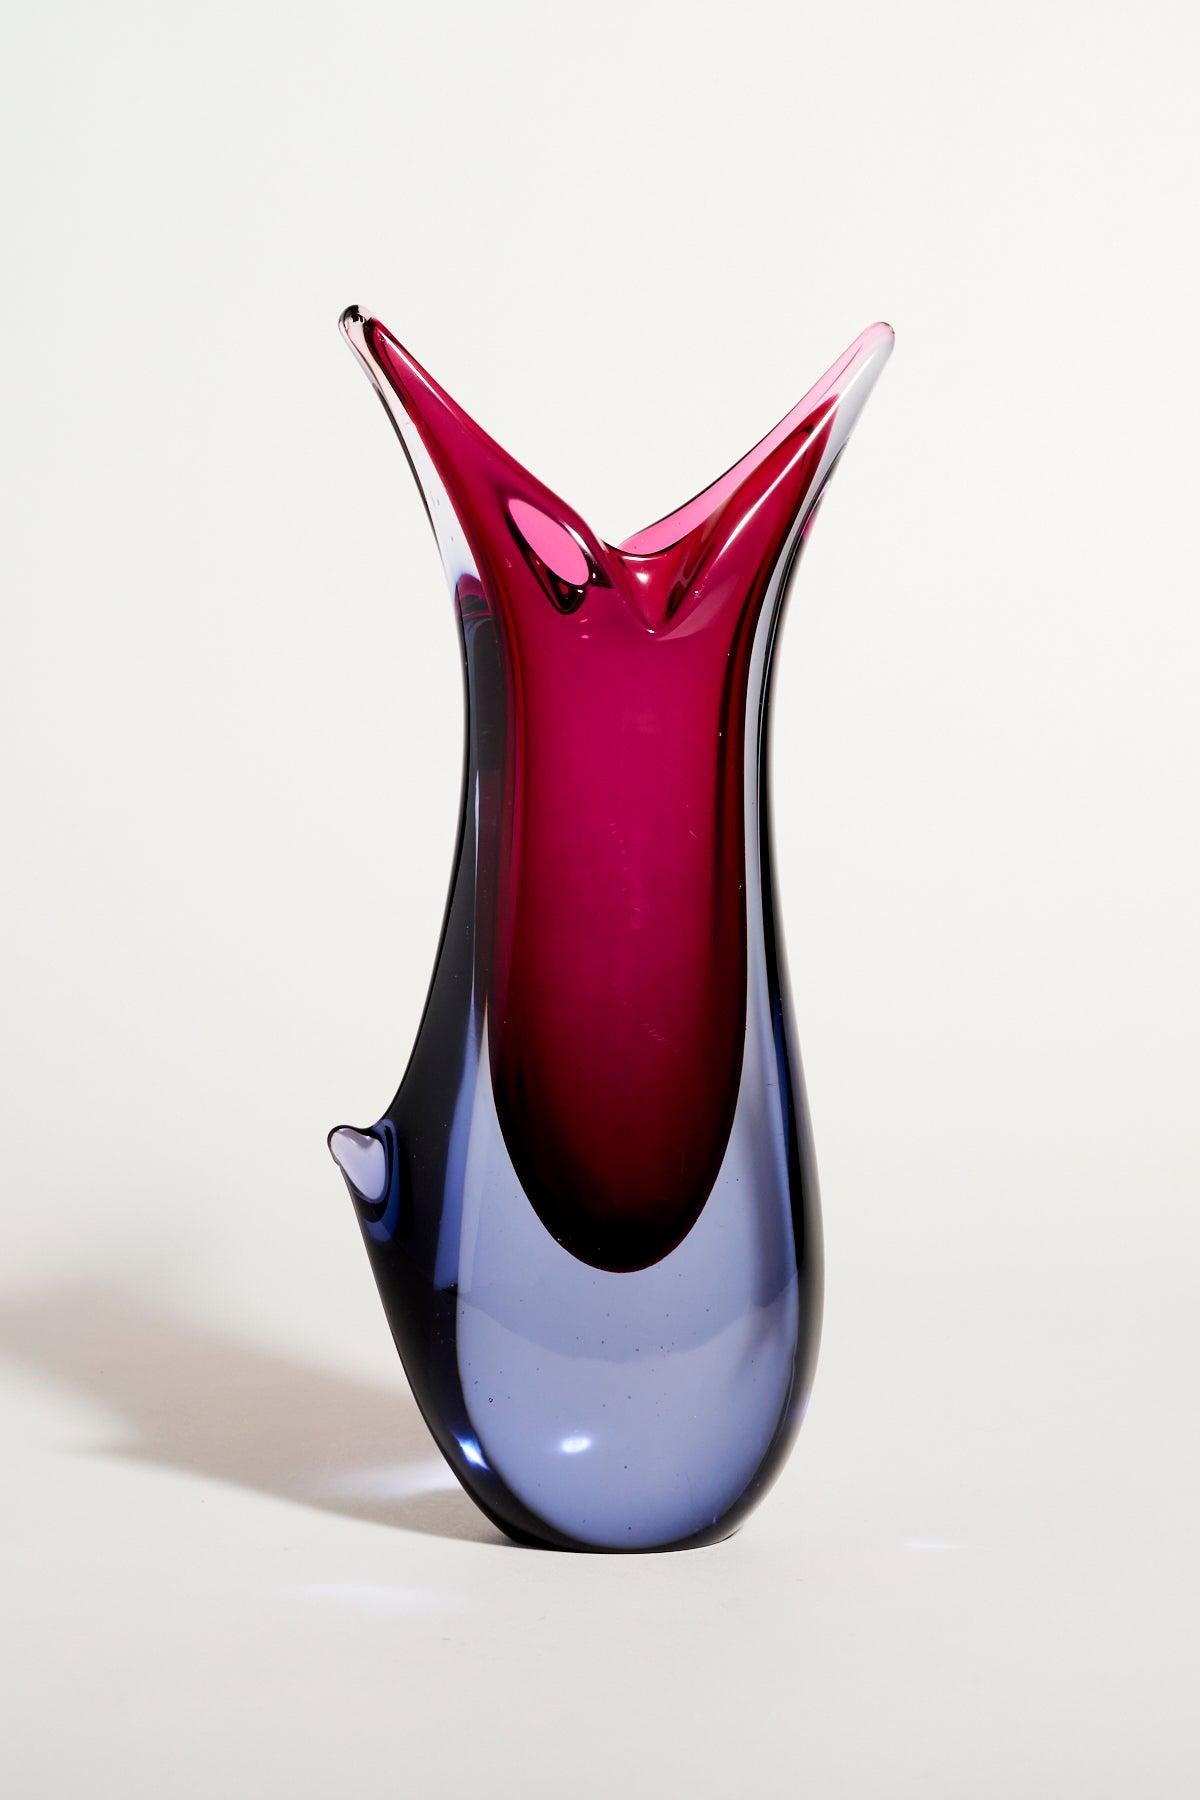 Asymetrical Salviati Murano layered glass vase in shades of rich cranberry contrasted with soft blue gray.